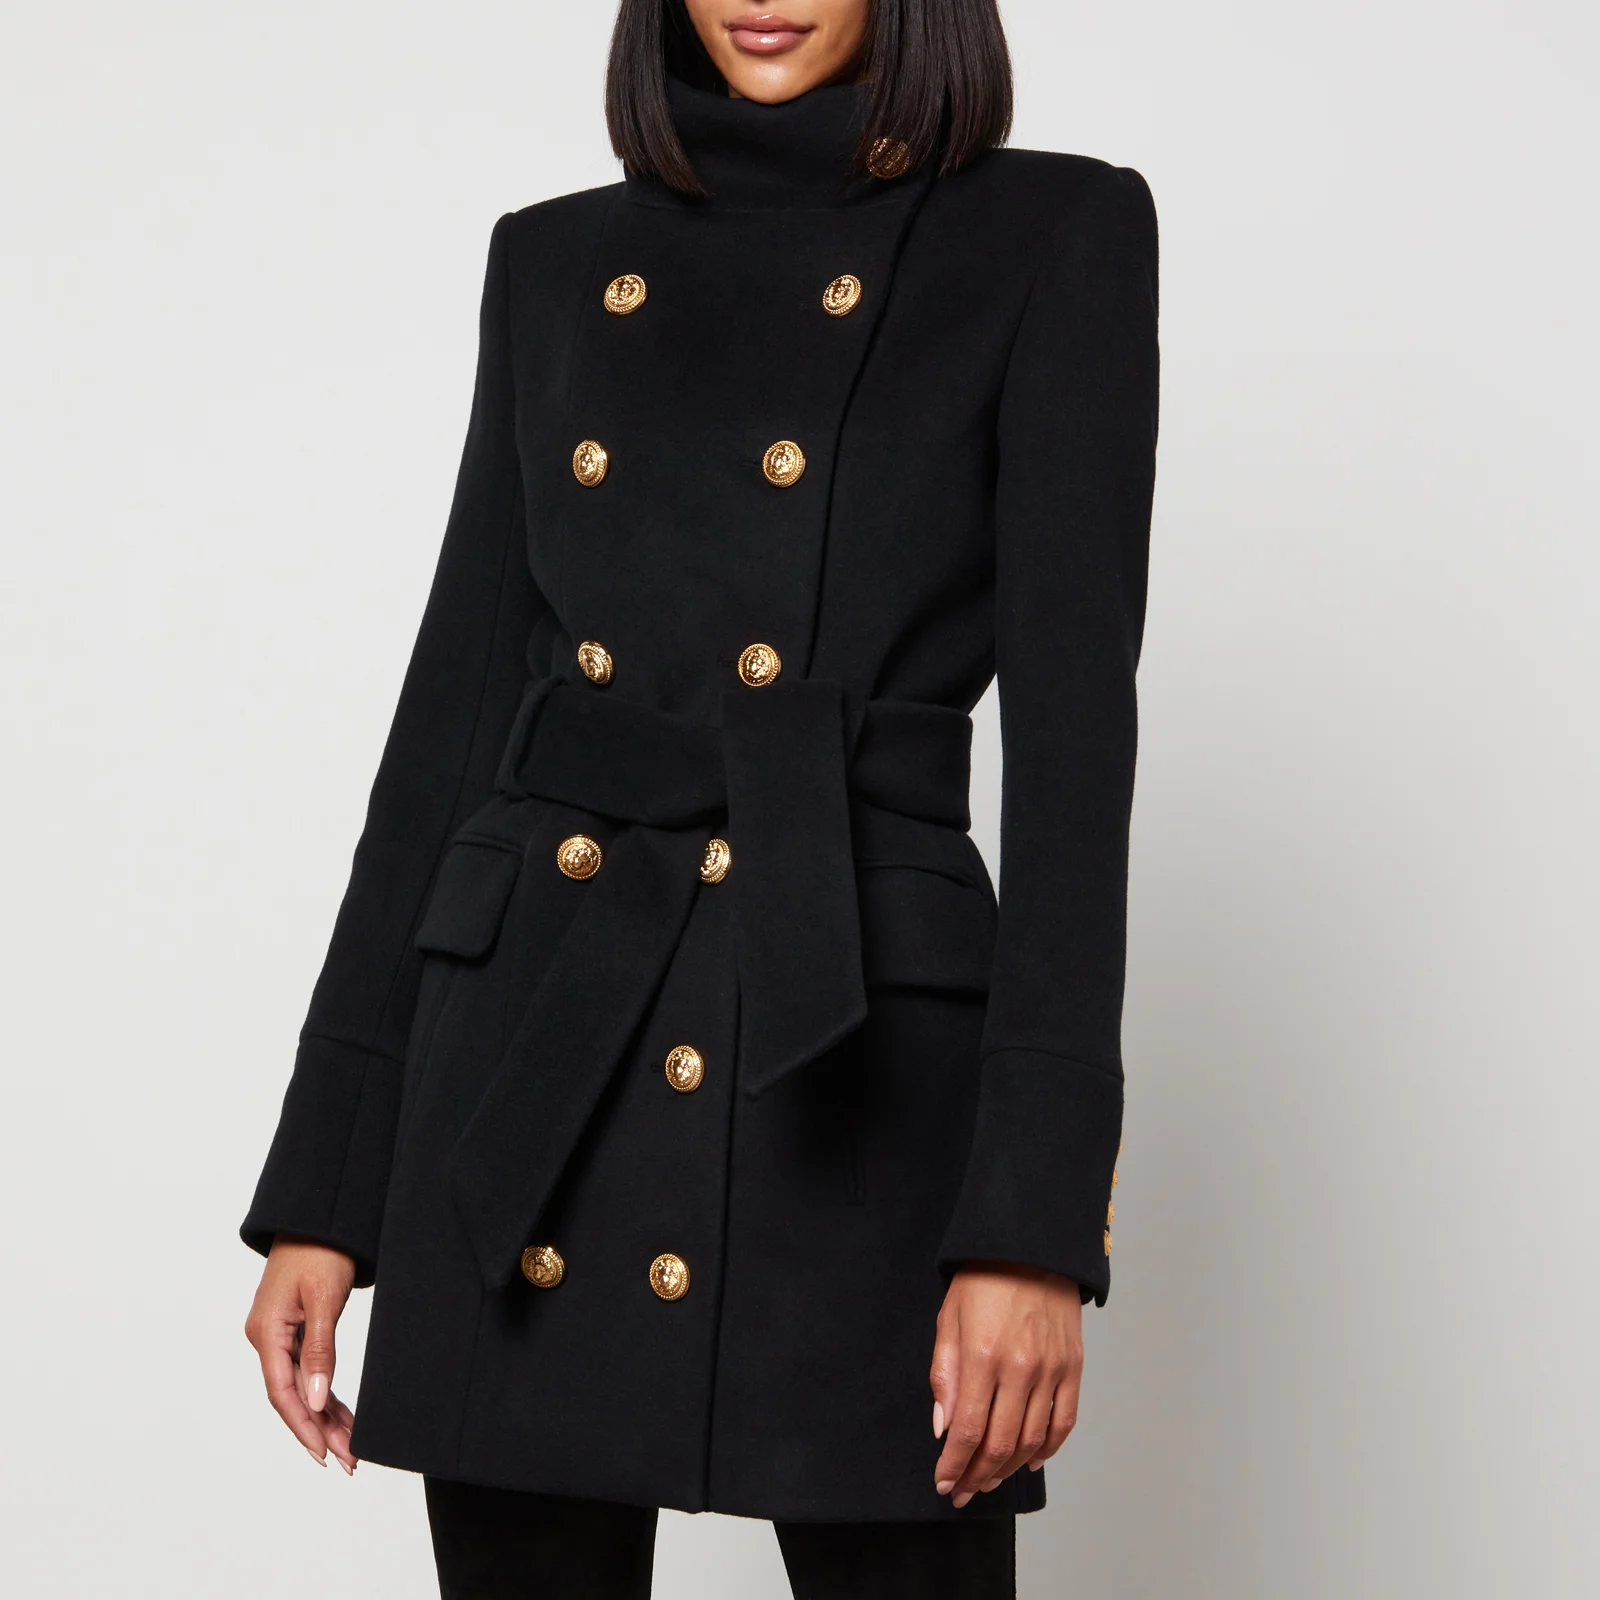 Balmain Belted Wool and Cashmere-Blend Coat Image 1